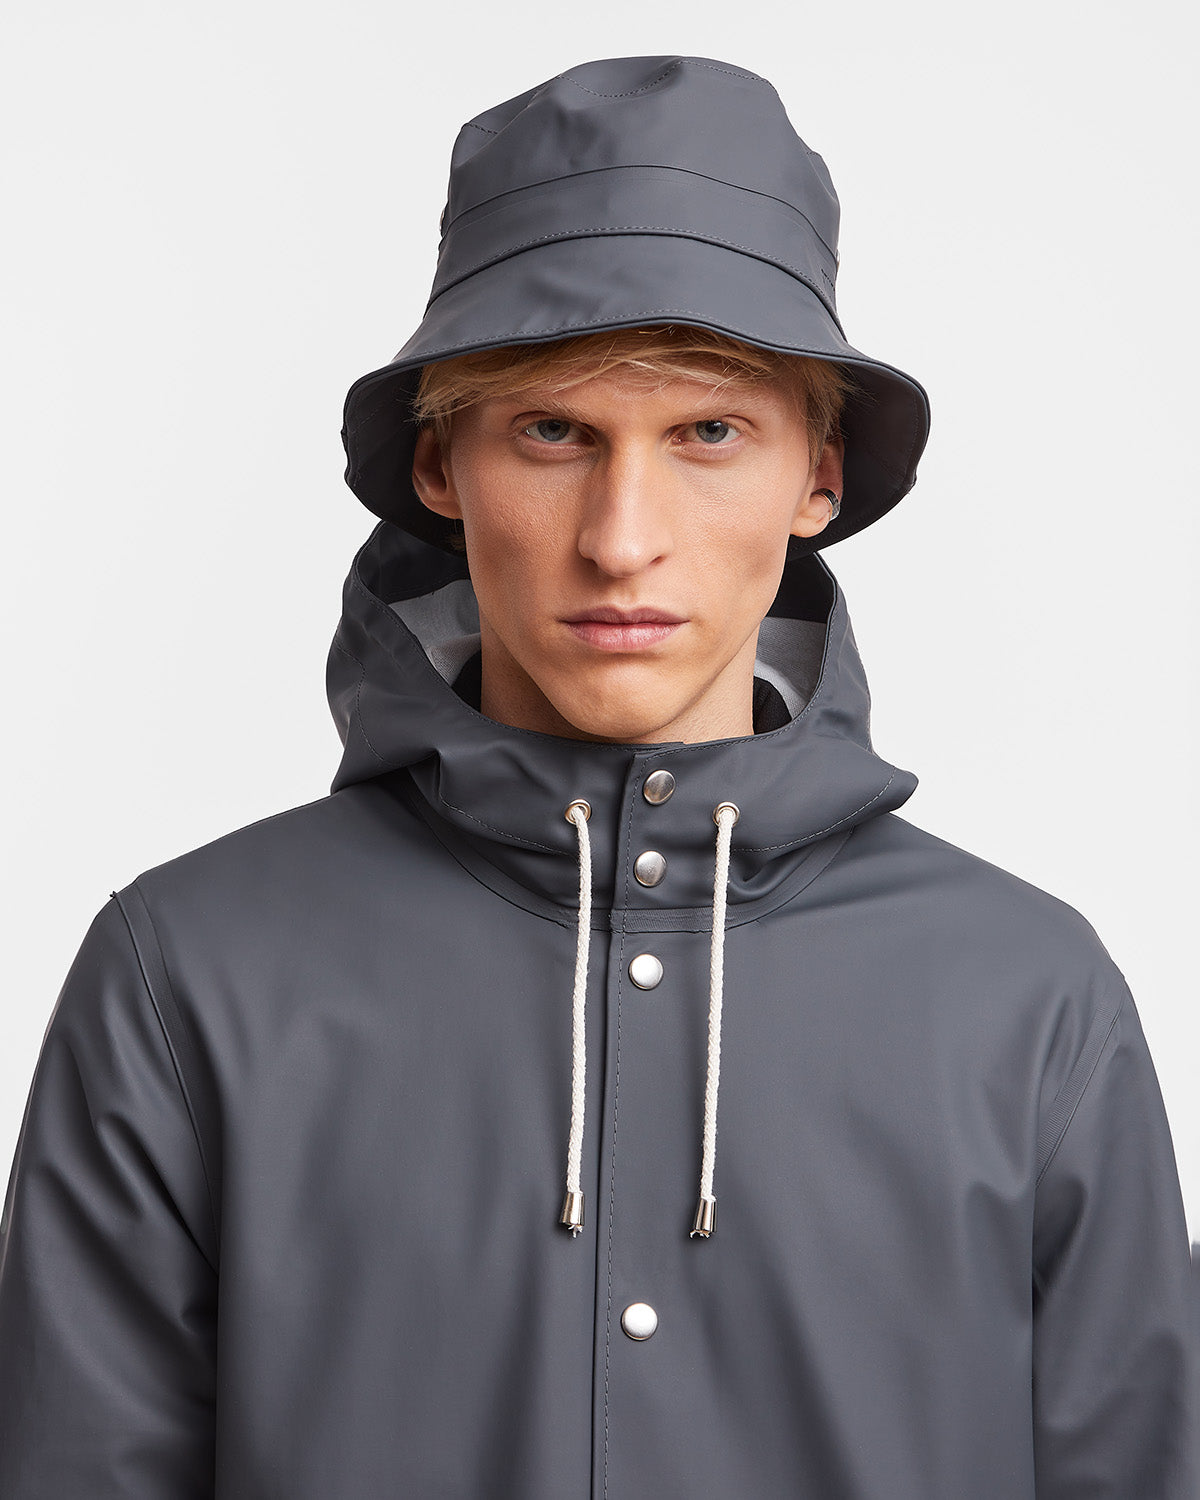 A man with Bucket Hat in color charcoal by Stutterheim seen from behind